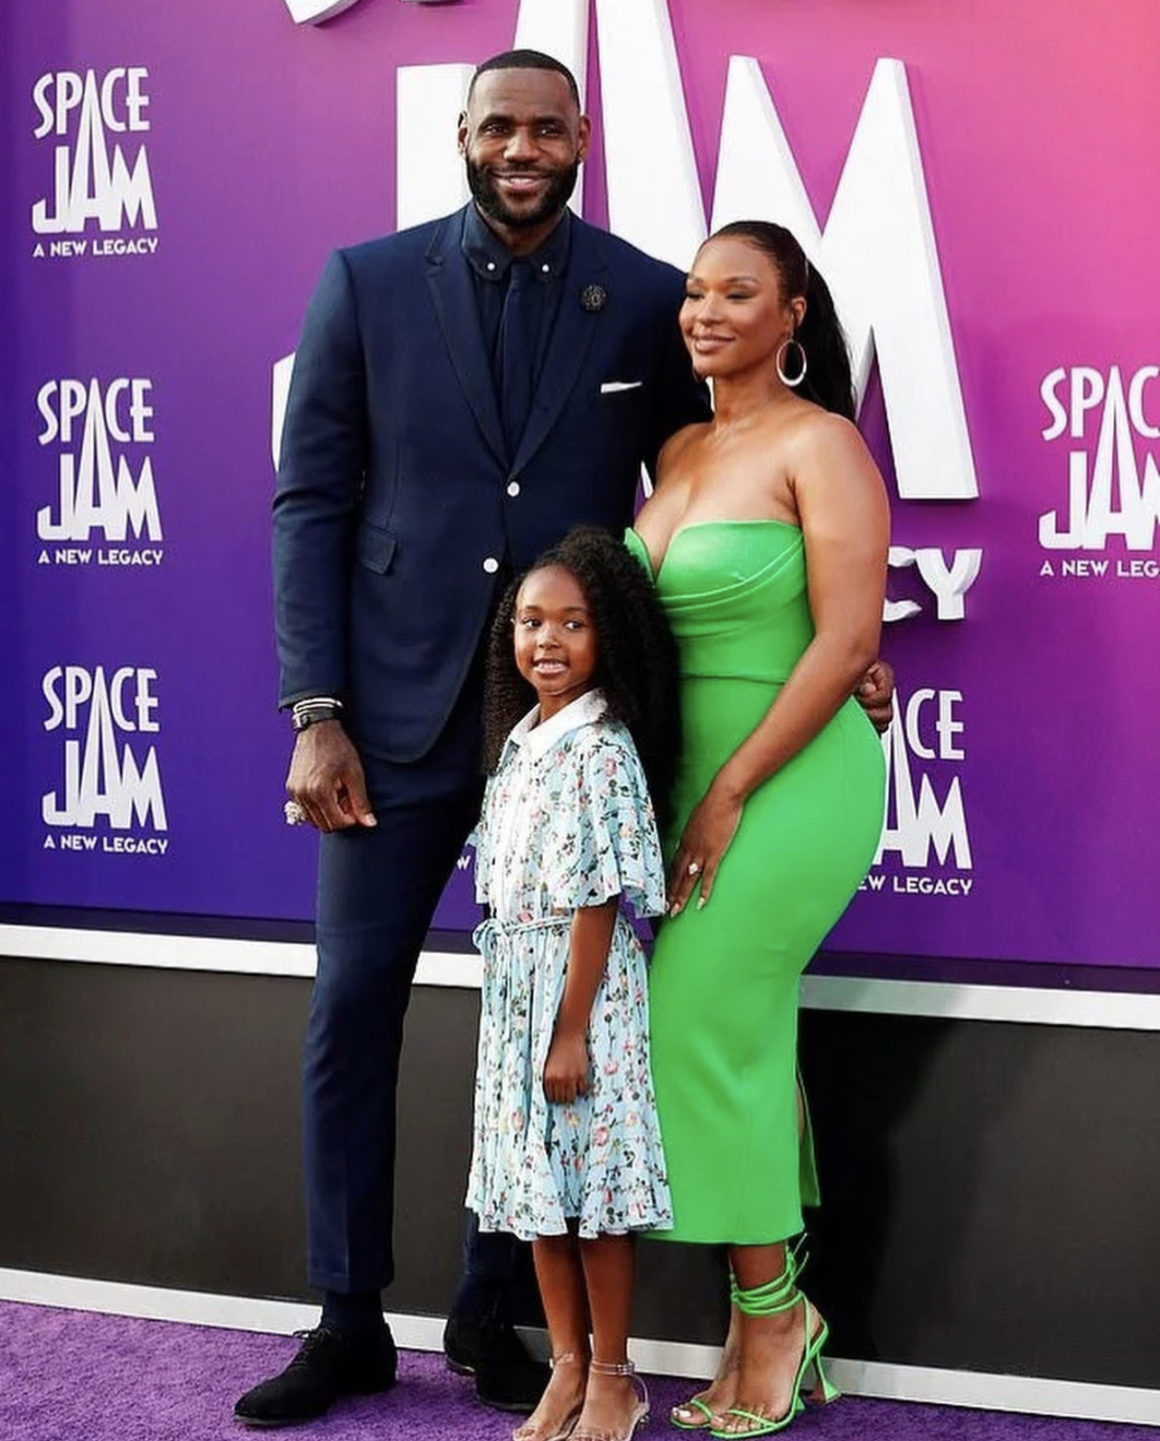 Savannah James and LeBron James attend the the Louis Vuitton Menswear  News Photo - Getty Images